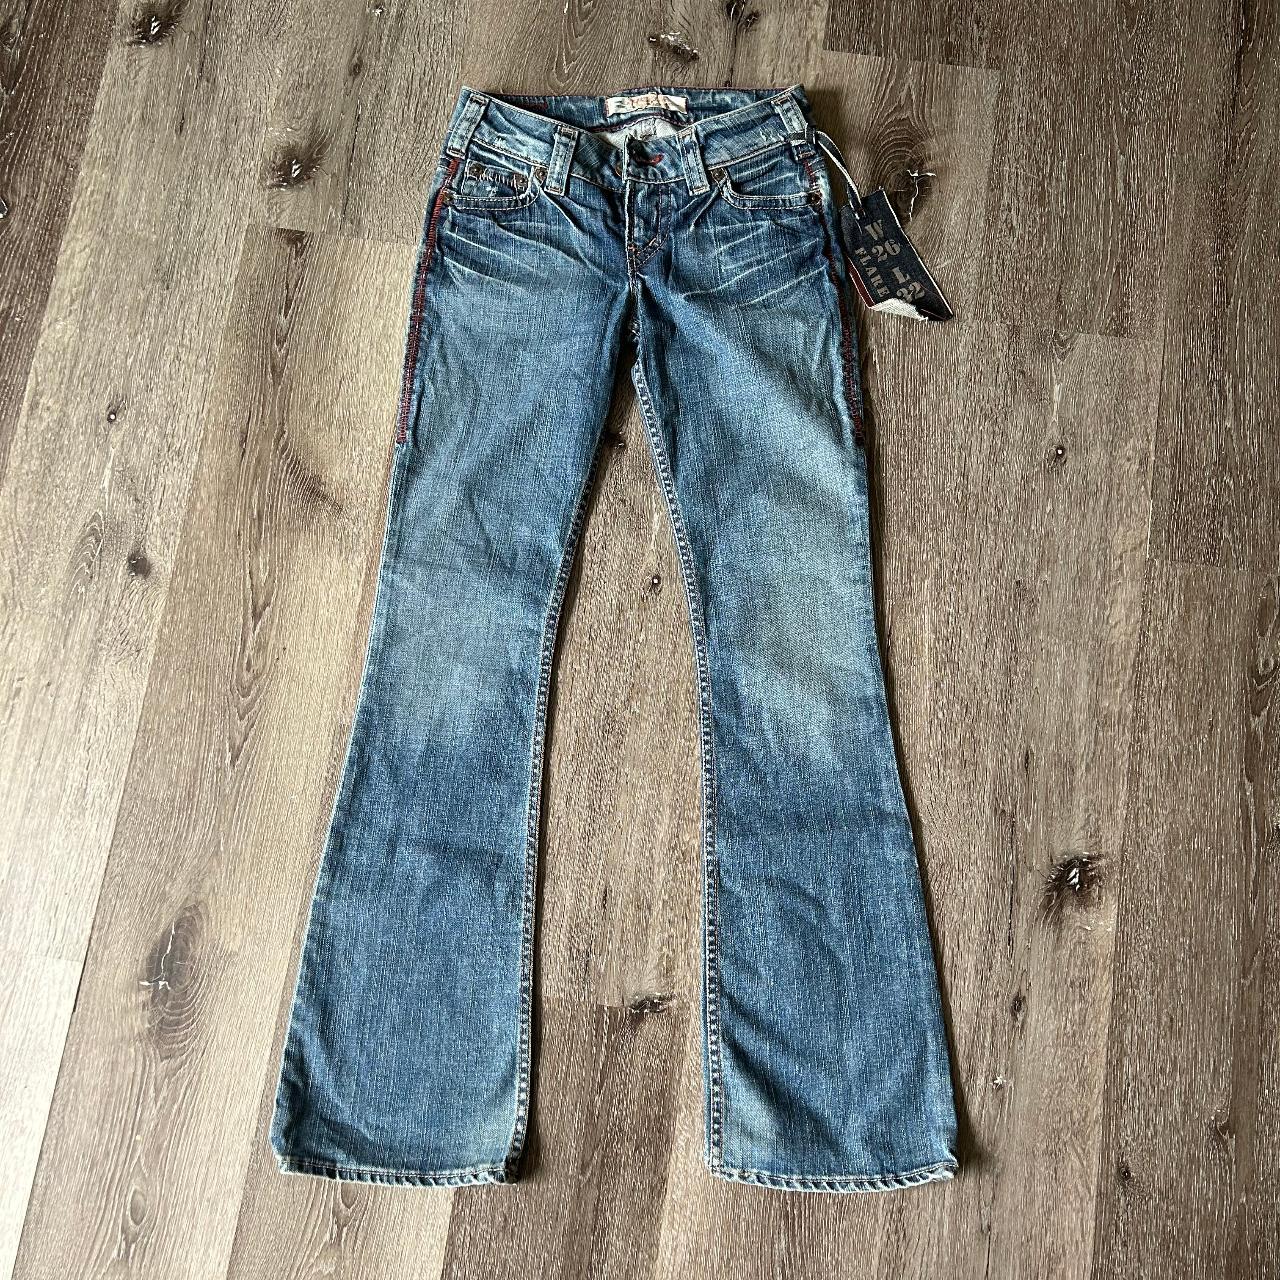 Emigrere Forføre gevinst 1921 Jeans, vintage! These are so beautiful and I... - Depop